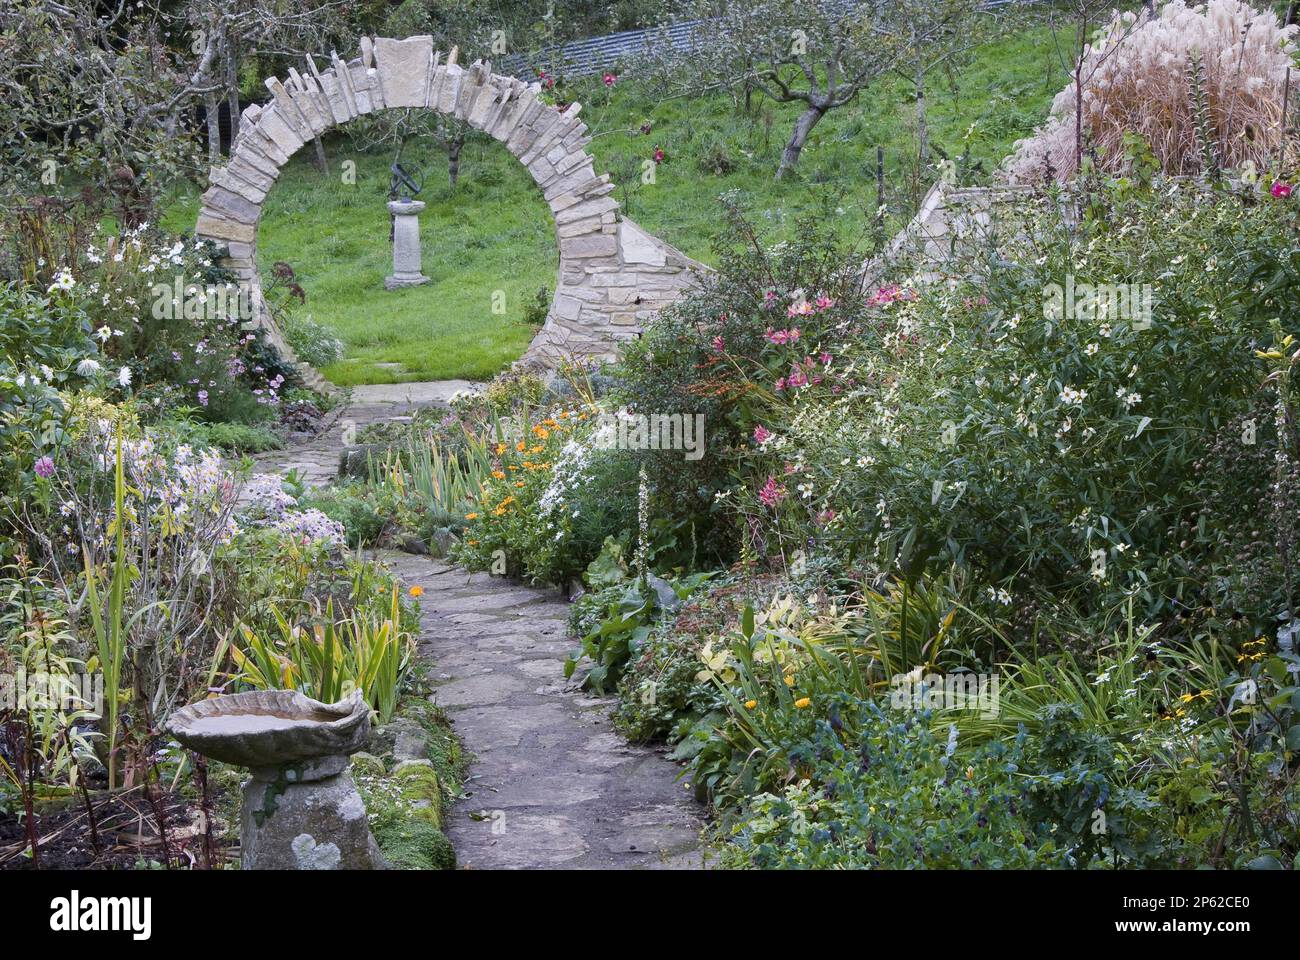 old stone paving path in country garden with flower borders leading to stone moon gate with garden view beyond Stock Photo